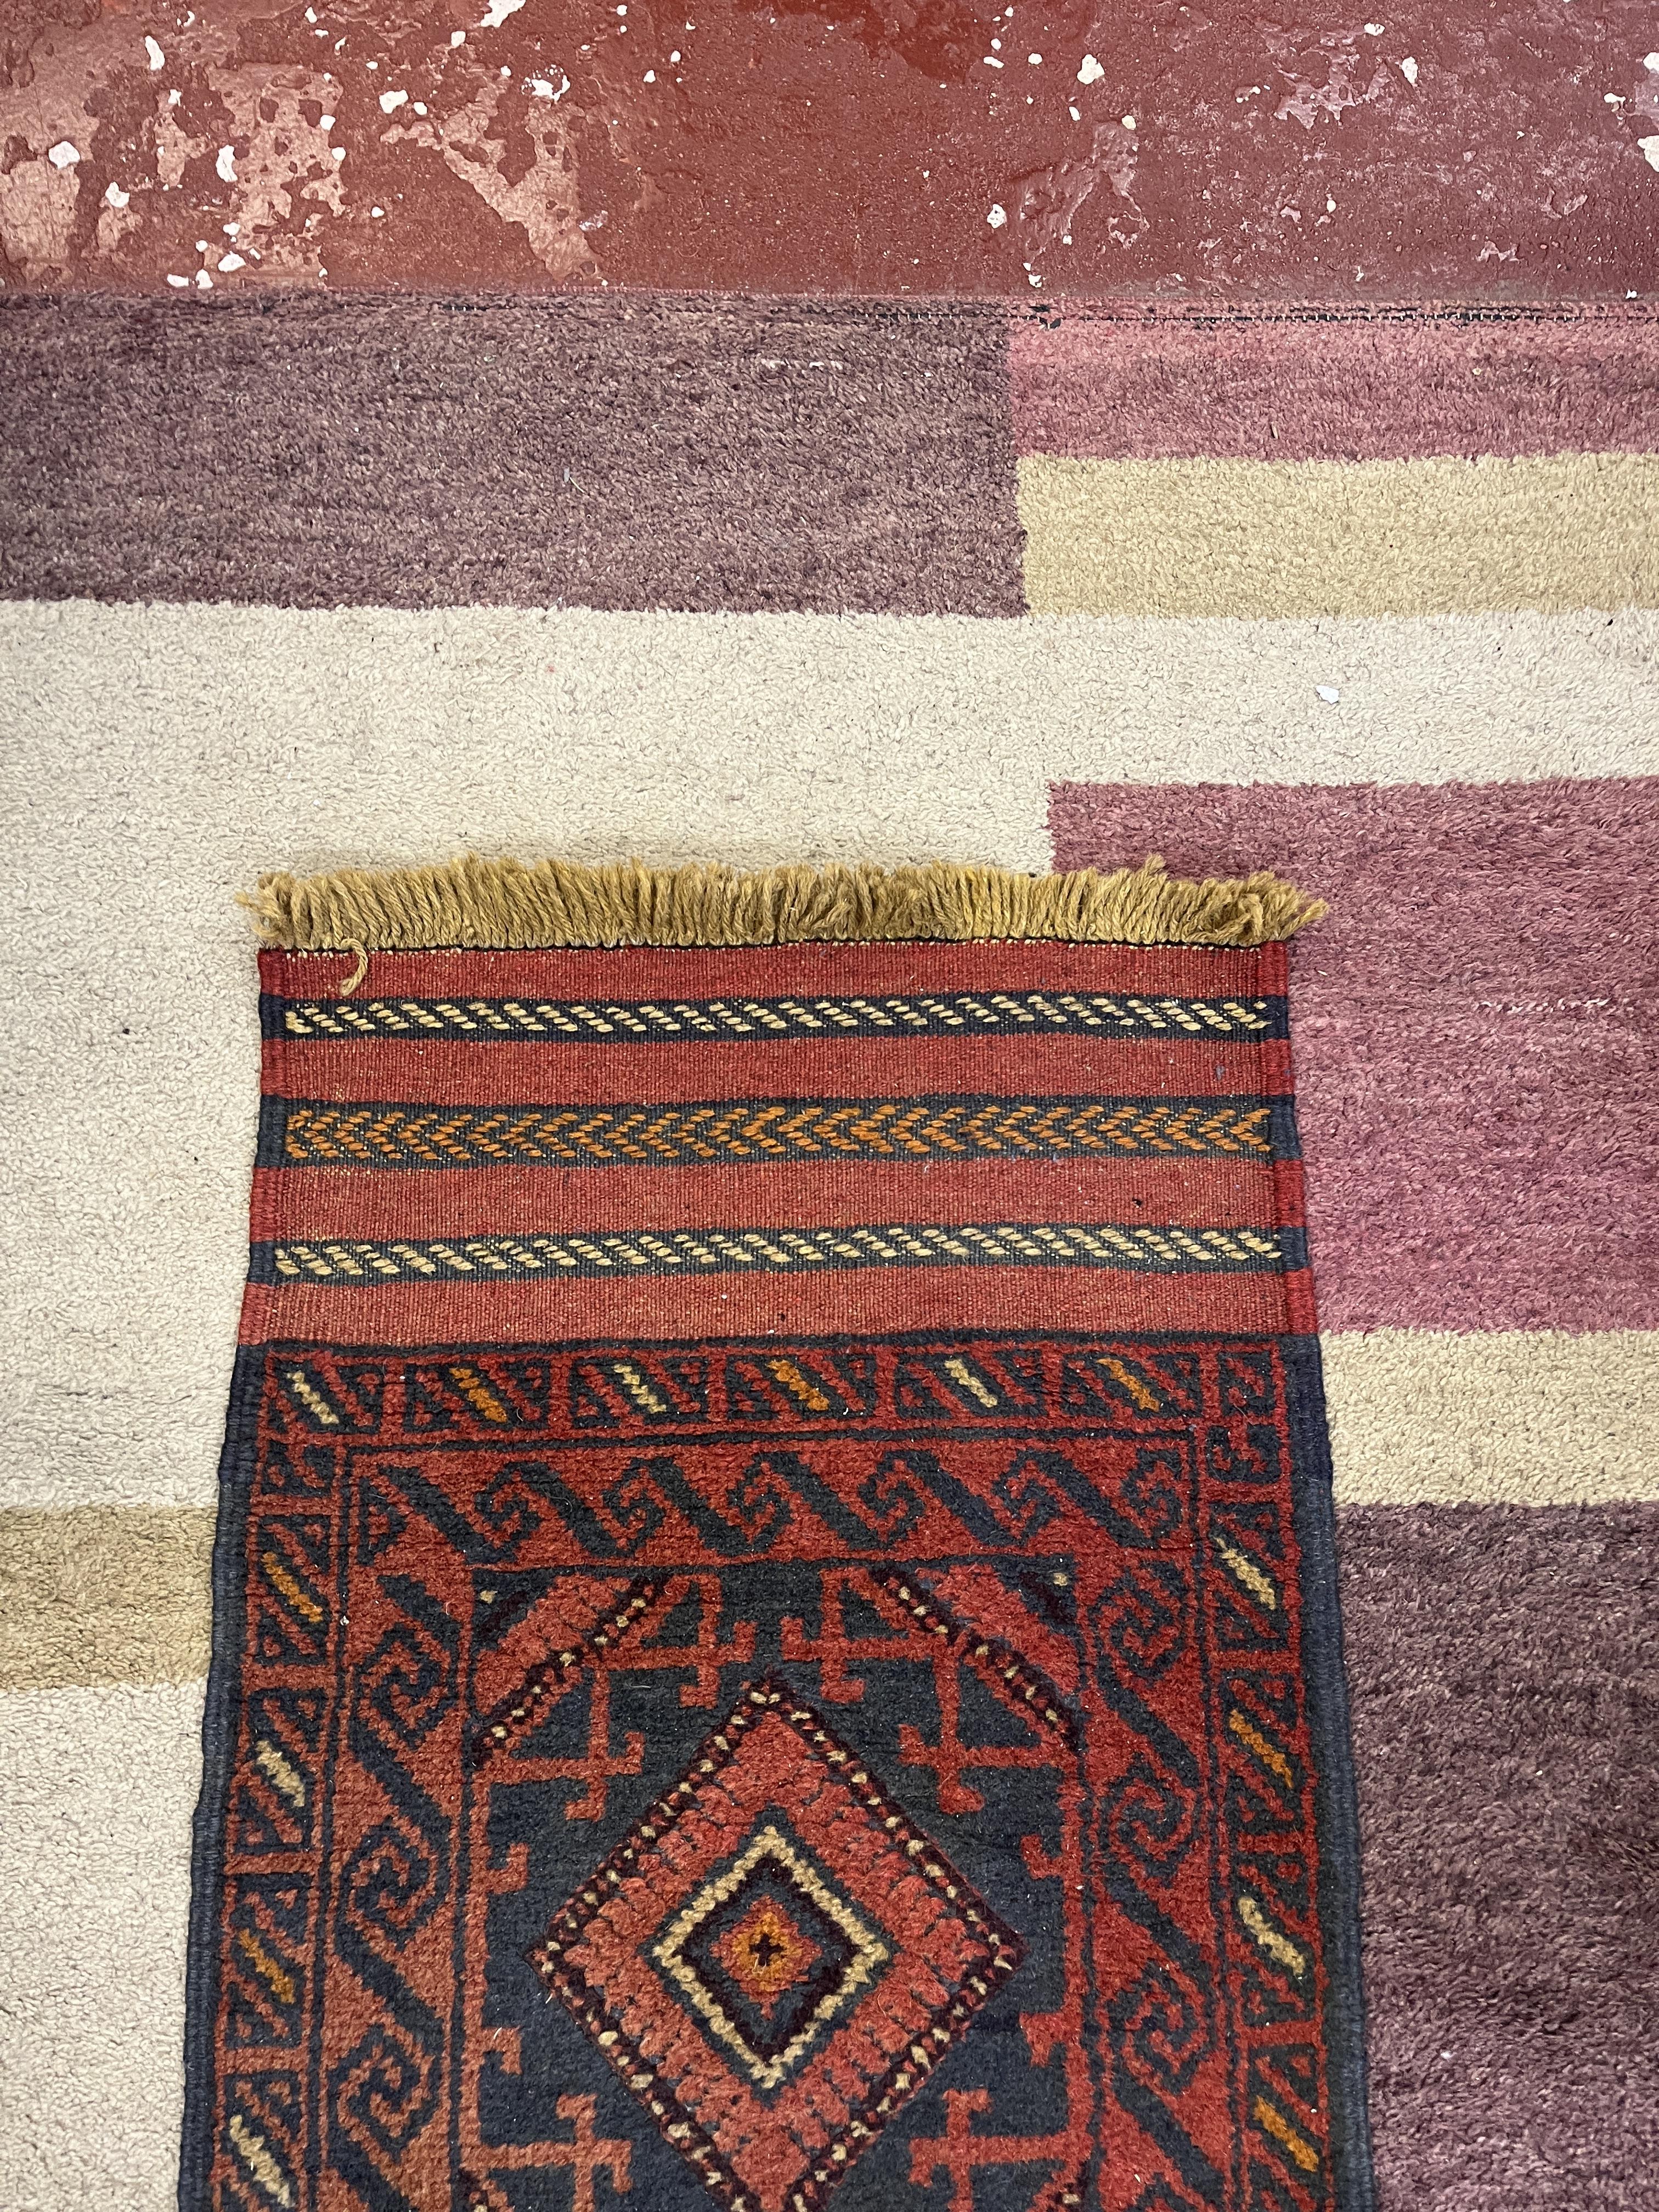 Afghan runner - Approx size: 243cm x 59cm - Image 4 of 5